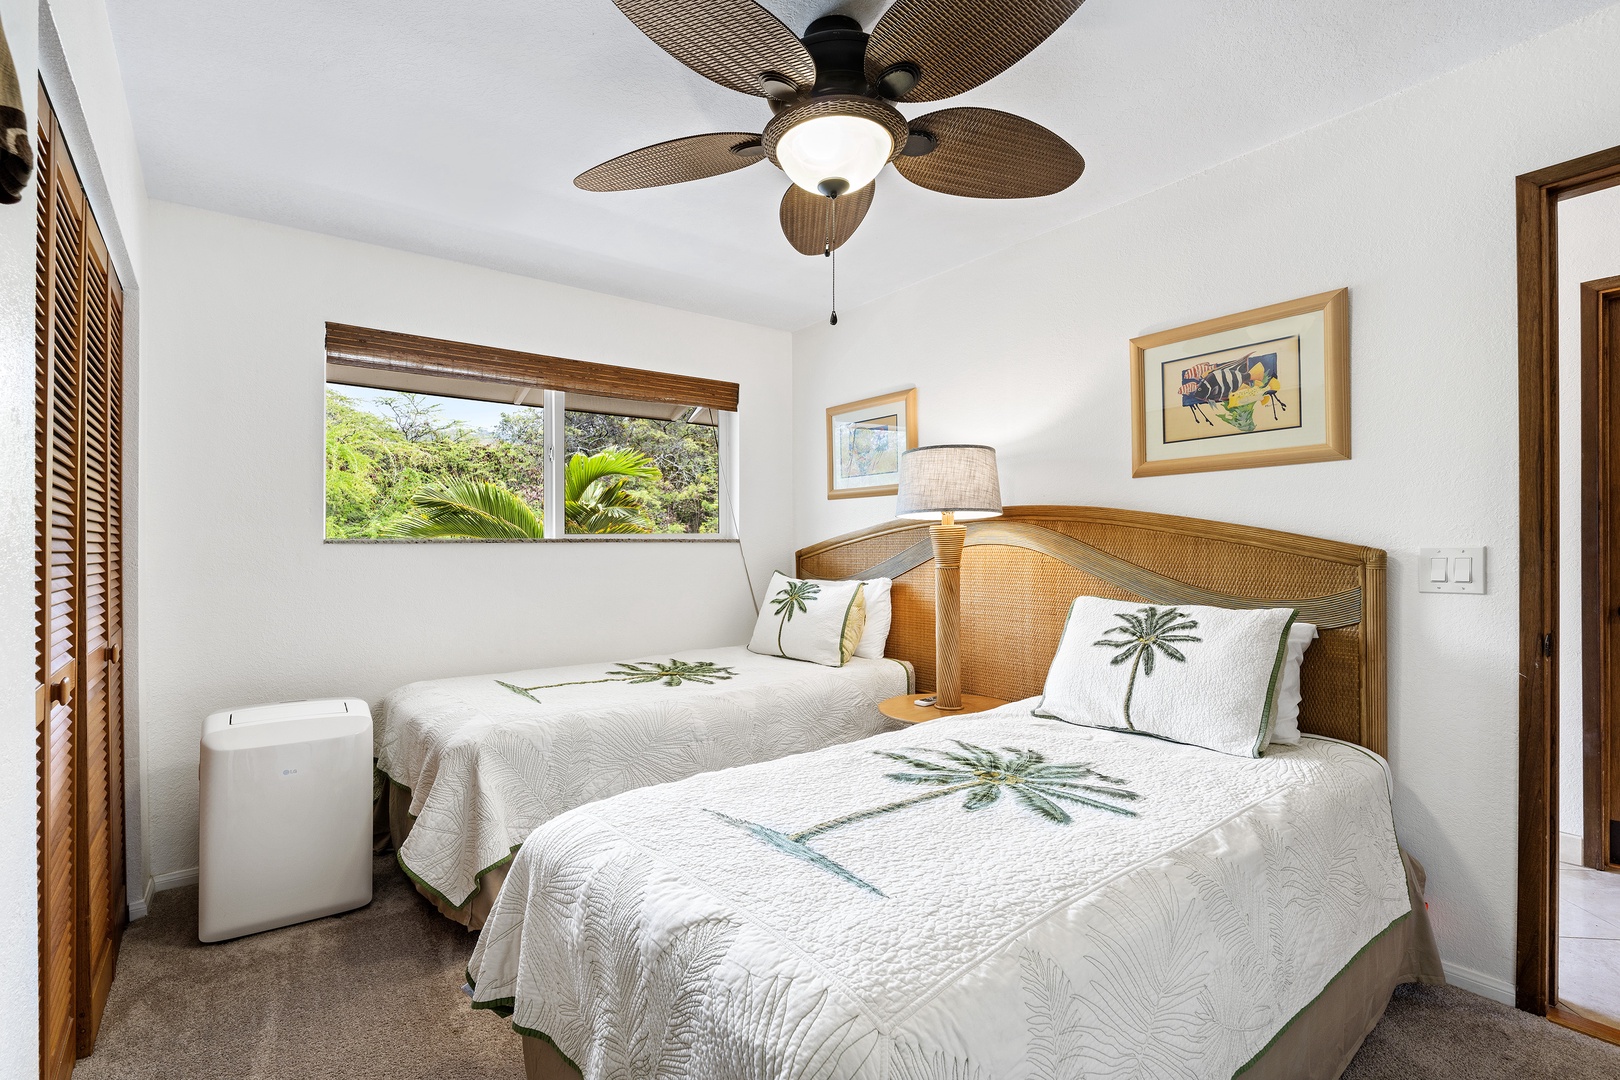 Kailua Kona Vacation Rentals, Kahalu'u Reef 203 - Guest bedroom equipped with 2 Twin beds and portable A/C